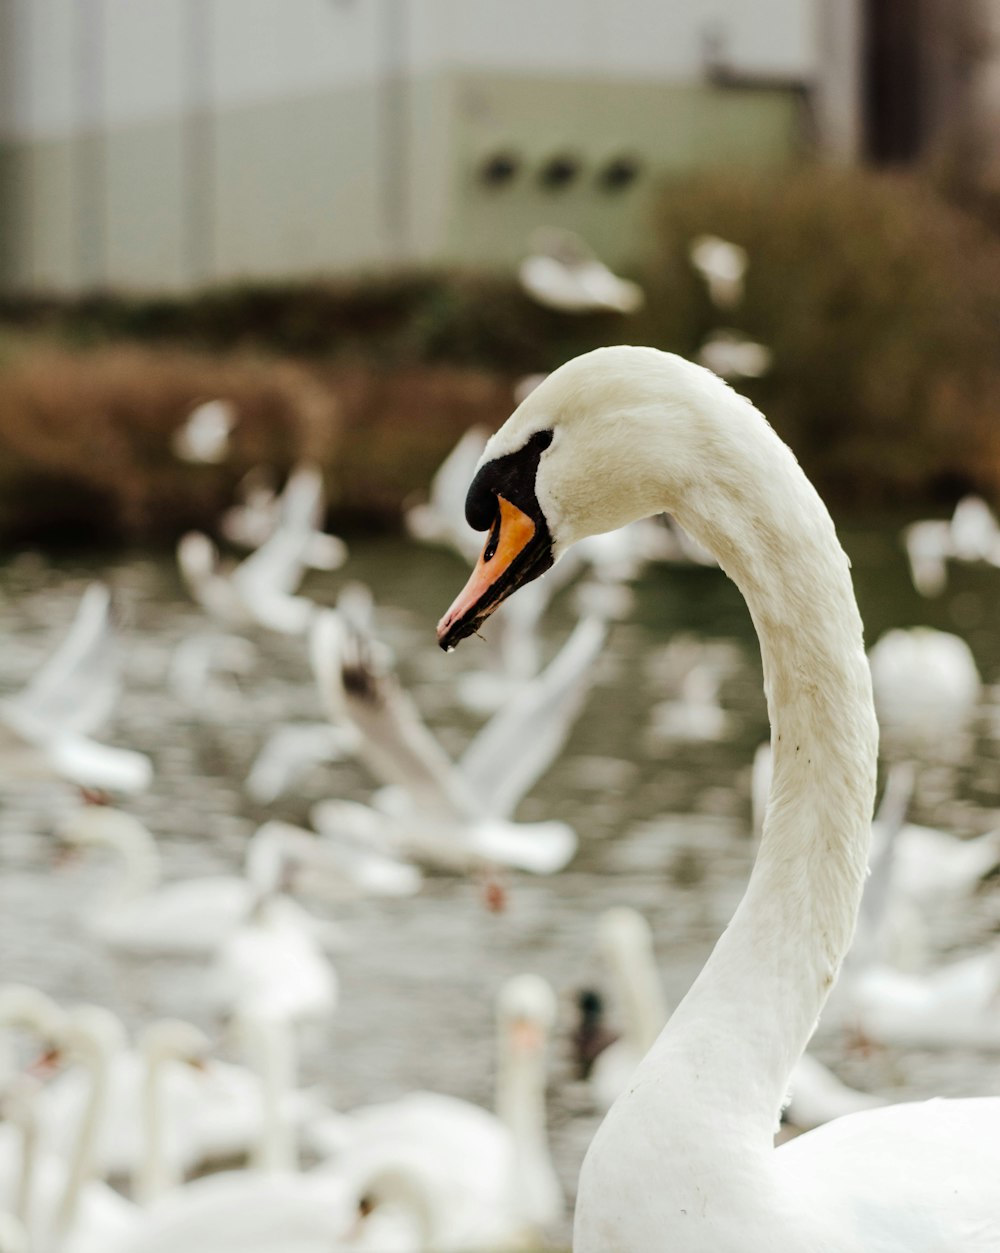 a large white swan standing in front of a flock of birds